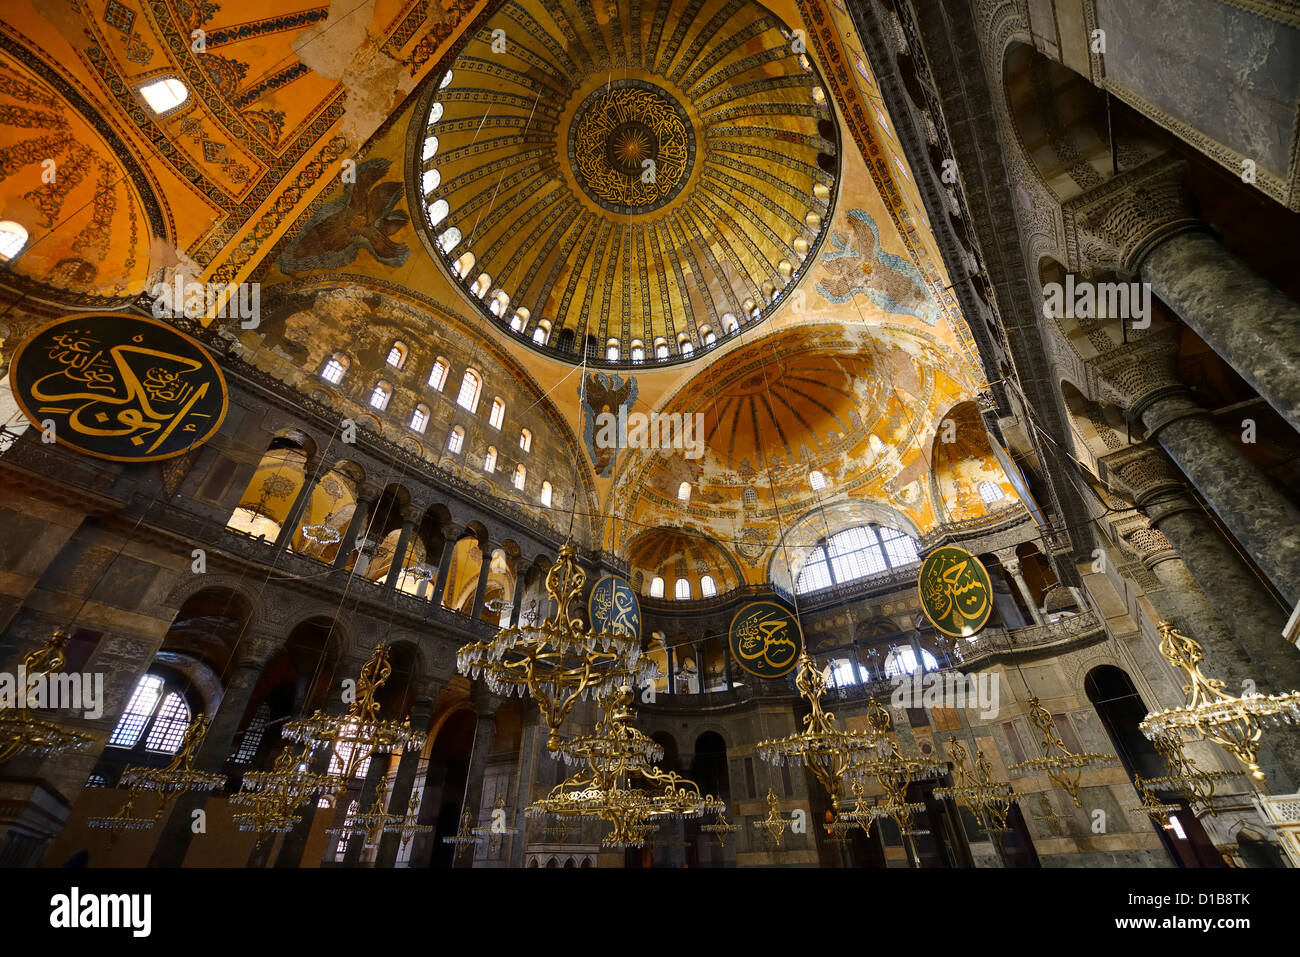 Golden domes frescoes and six winged Saraphim in the Hagia Sophia with chandeliers Istanbul Turkey Stock Photo